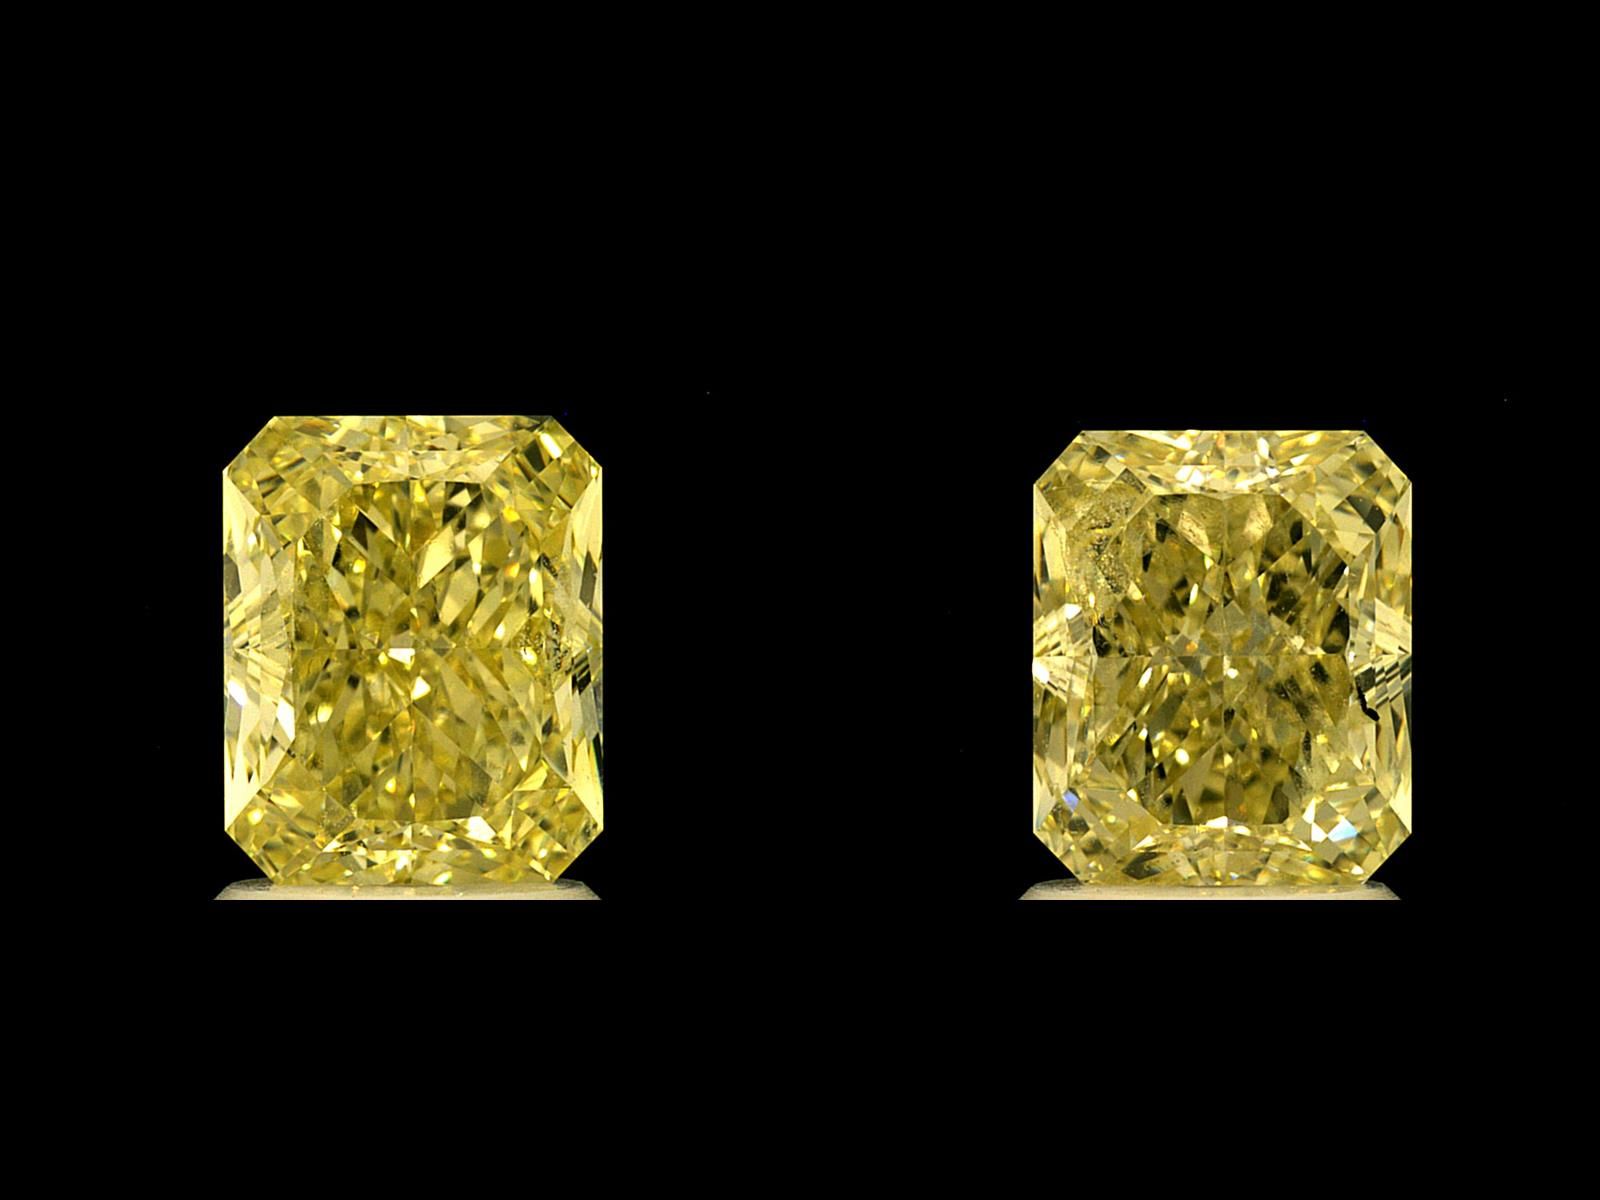 4.41ct., Pair of Natural Fancy Yellow, Radiant Shape, IF-VS Clarity, GIA